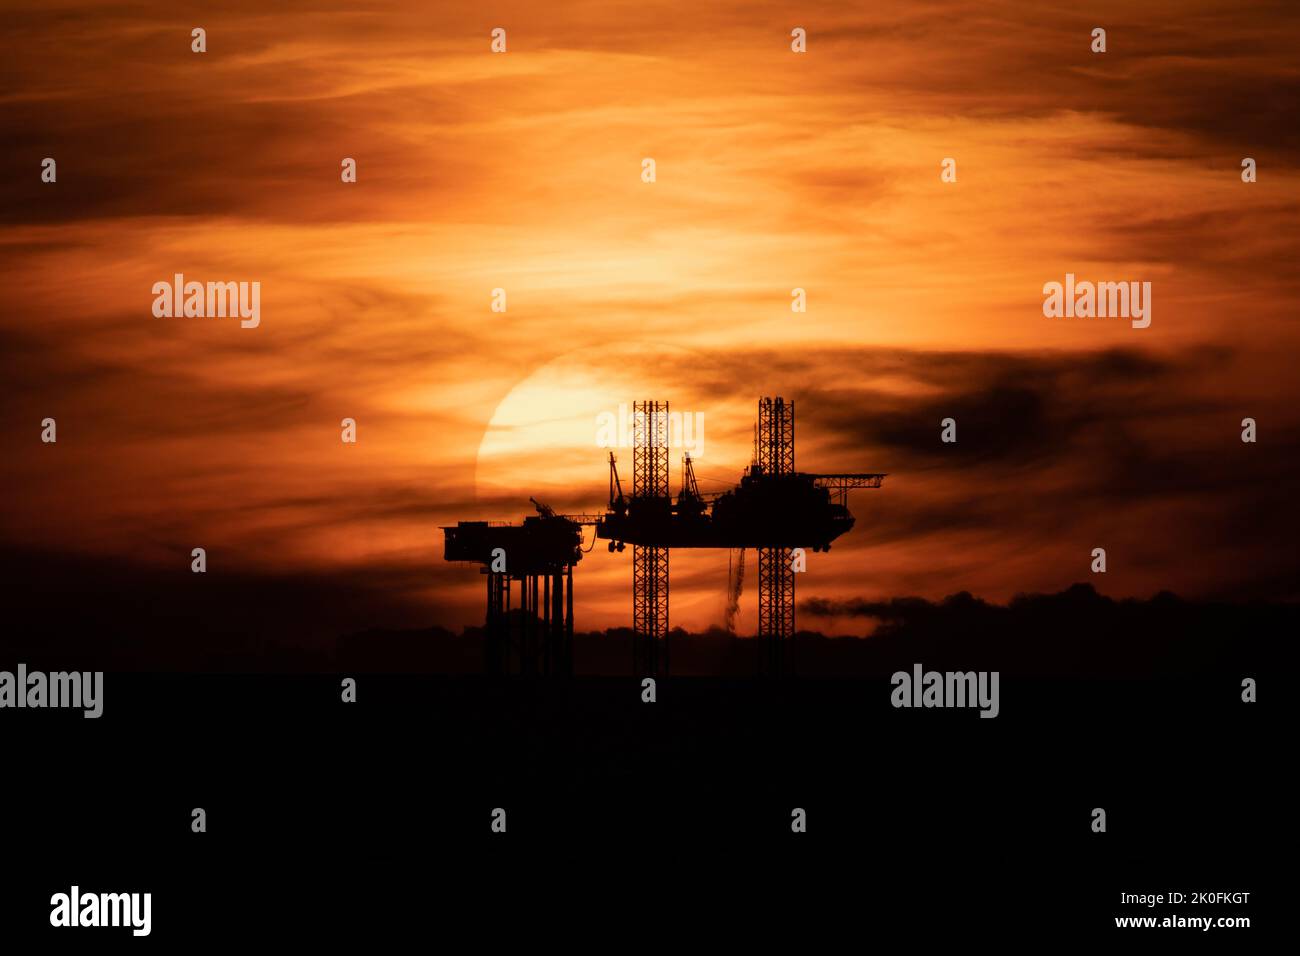 Oil rig sunset, sunset over Lennox satellite platform in the Irish Sea, part of the Douglas Complex oil and gas rigs in Liverpool Bay, England, UK Stock Photo